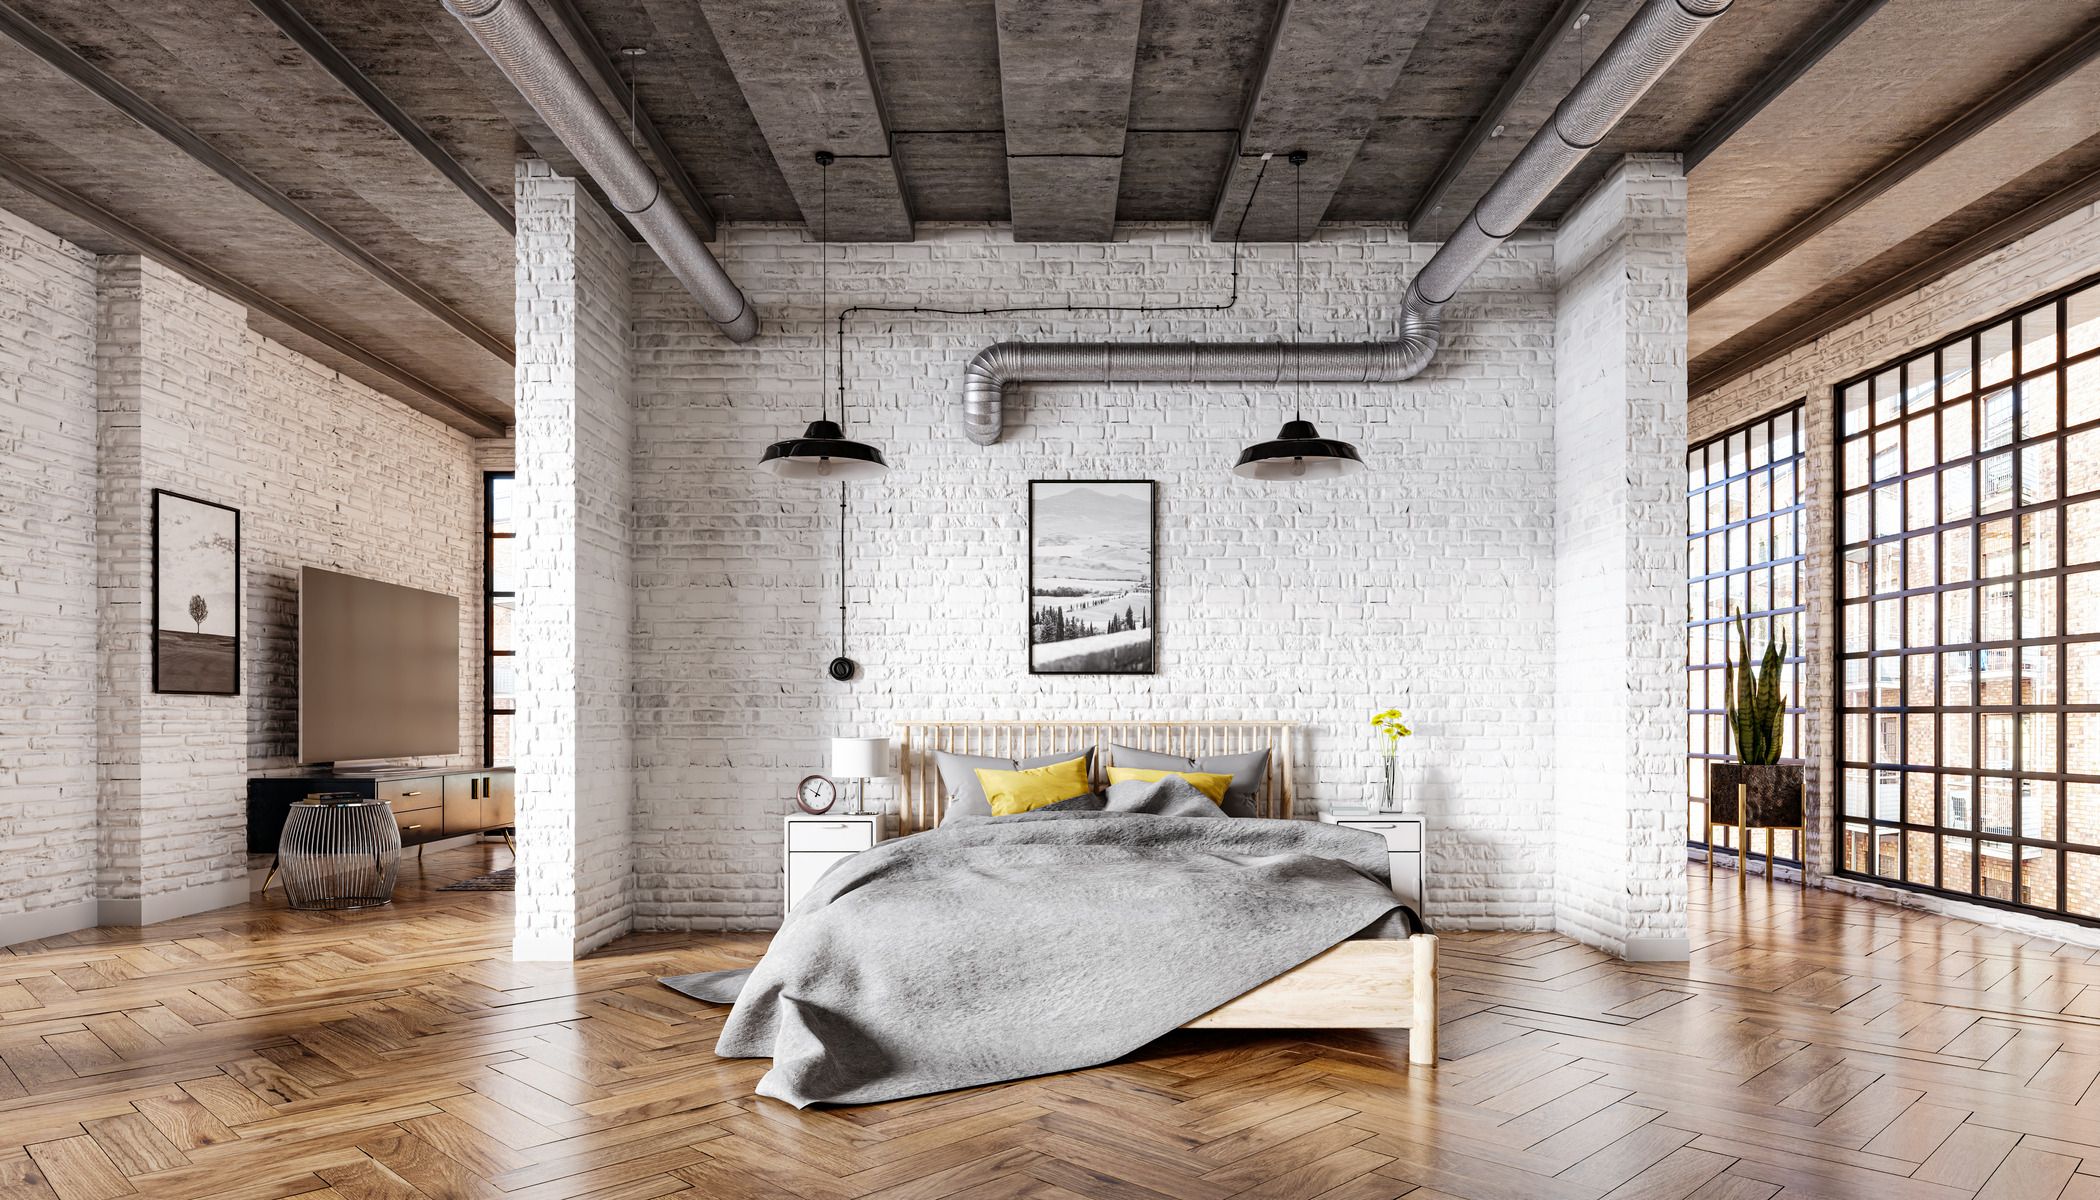 Industrial-style bedrooms: our design ideas